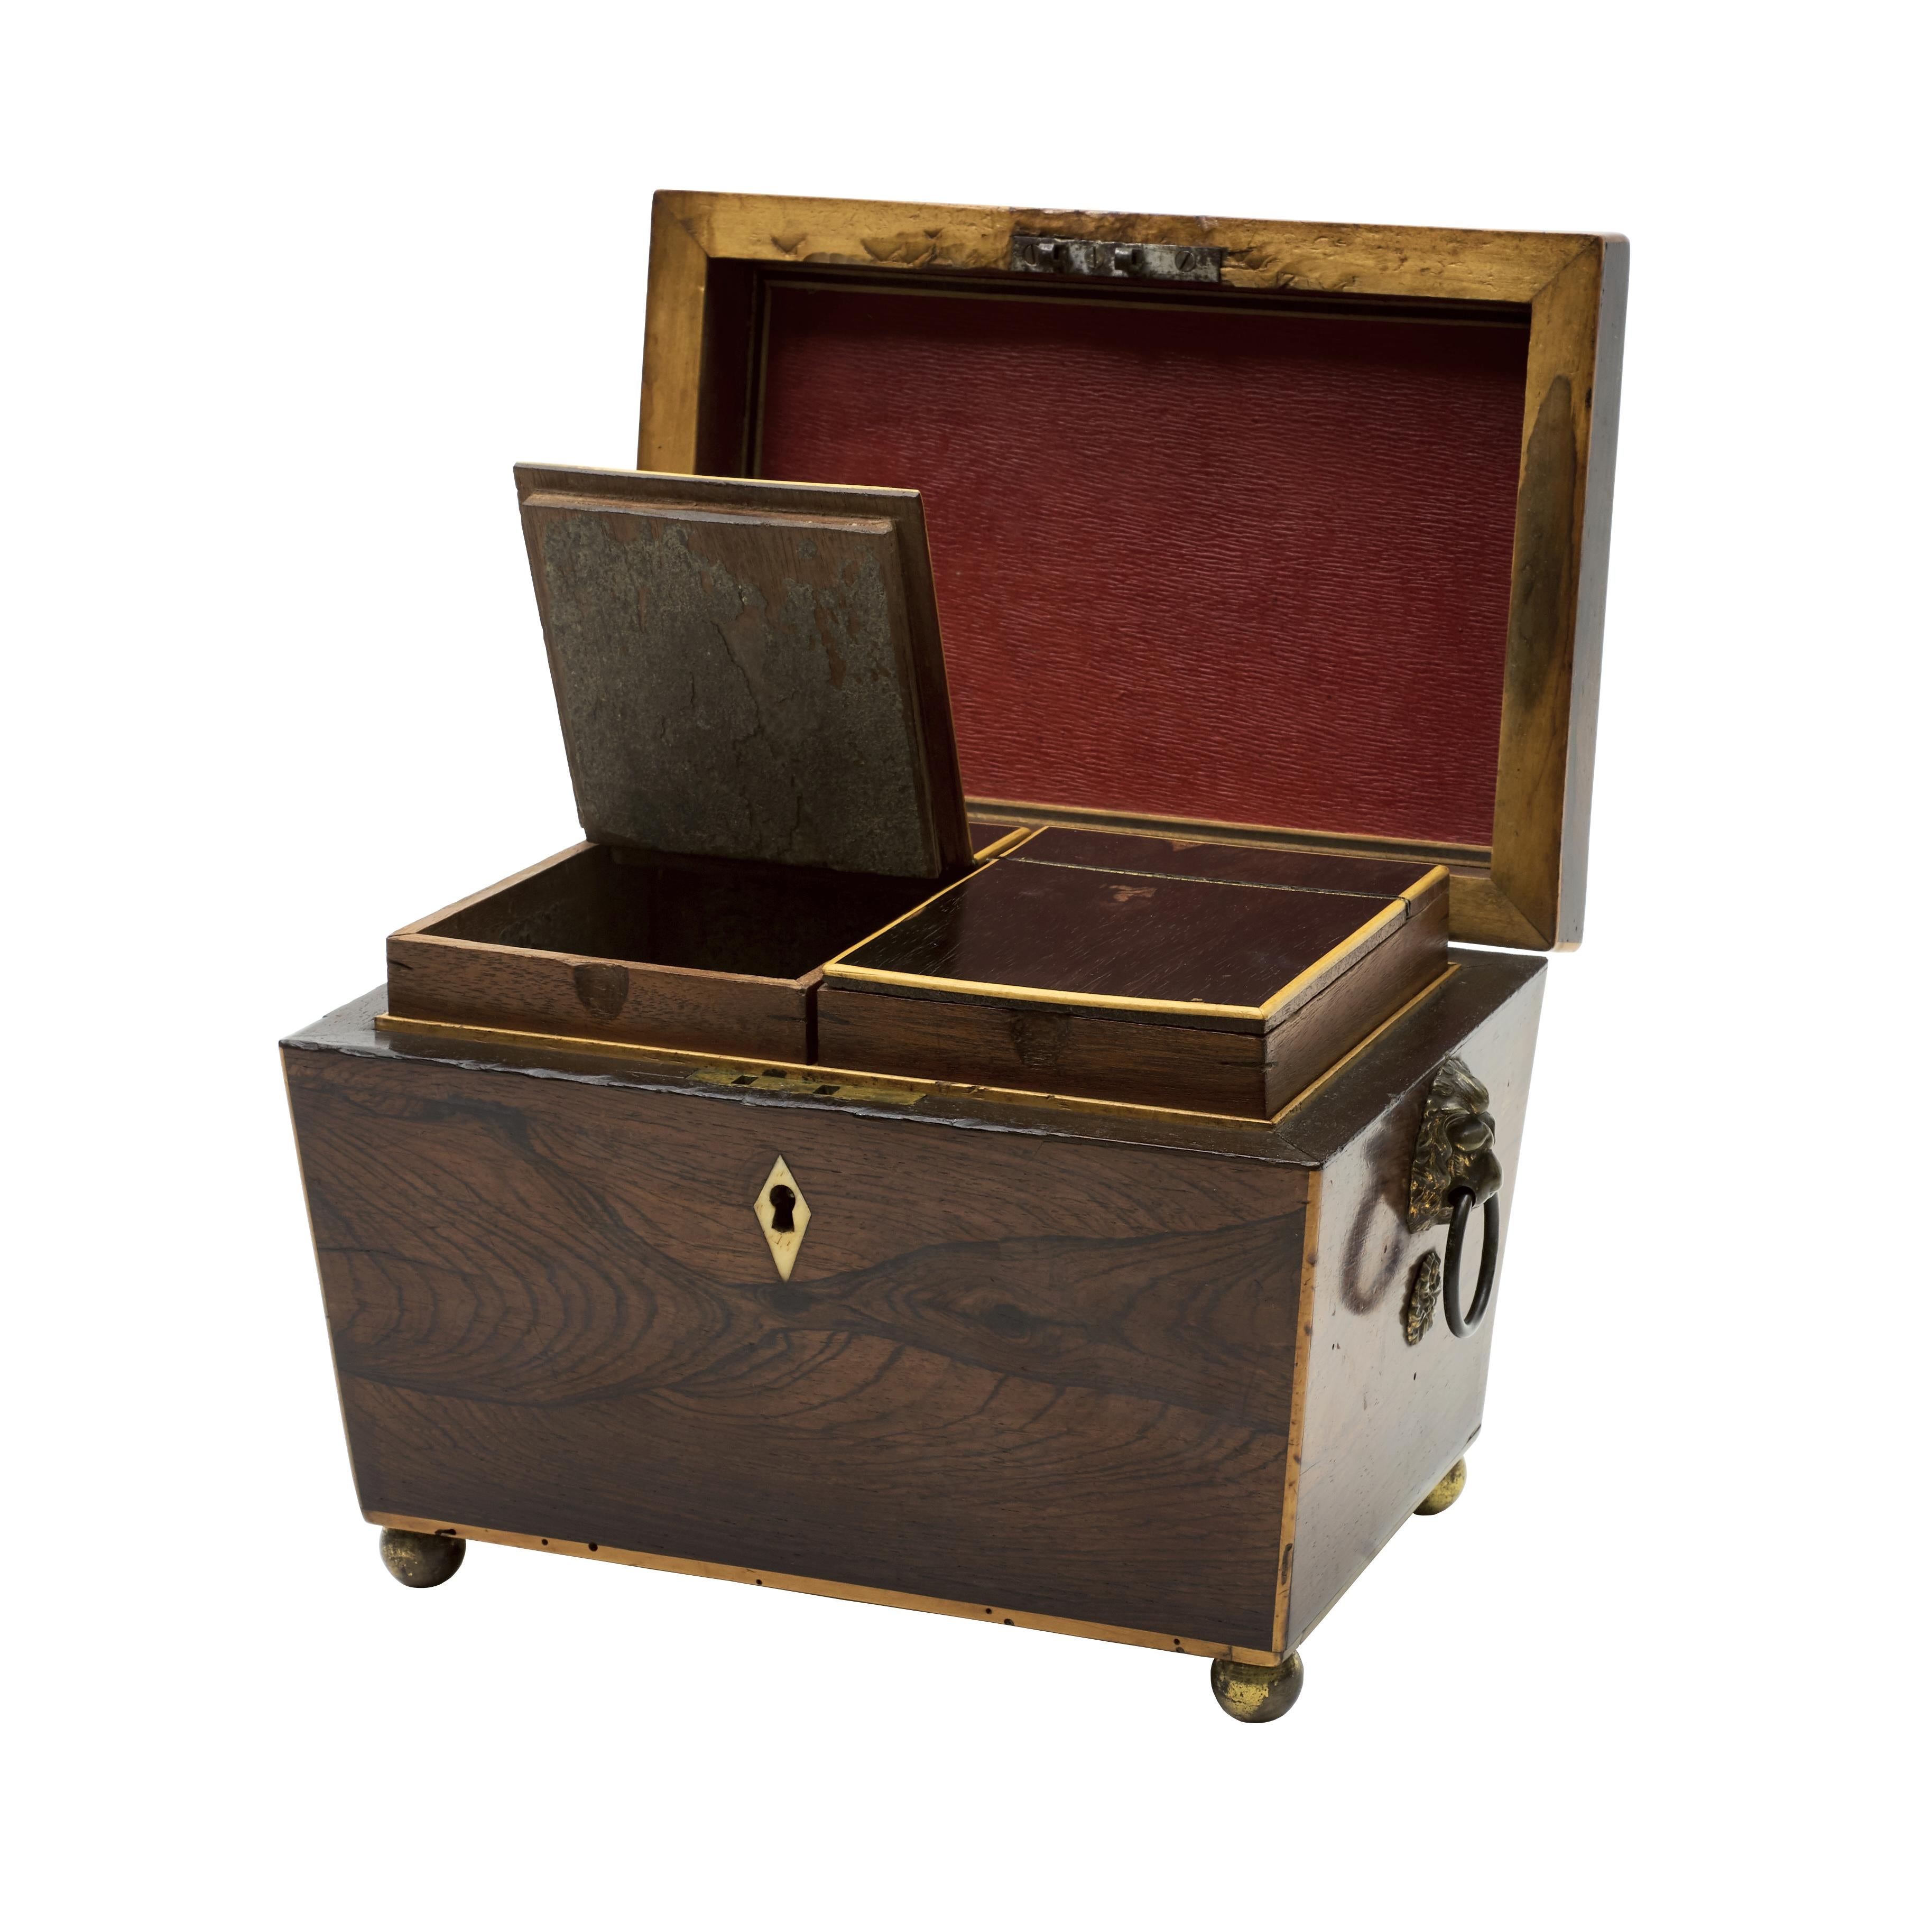 A rosewood pedestal tea caddy, made in England during the Regency period.
The caddy is veneered with rosewood and banded with satinwood. There are gilt-brass handles (lion masks) on either side as well as four spherical feet to the base. The box